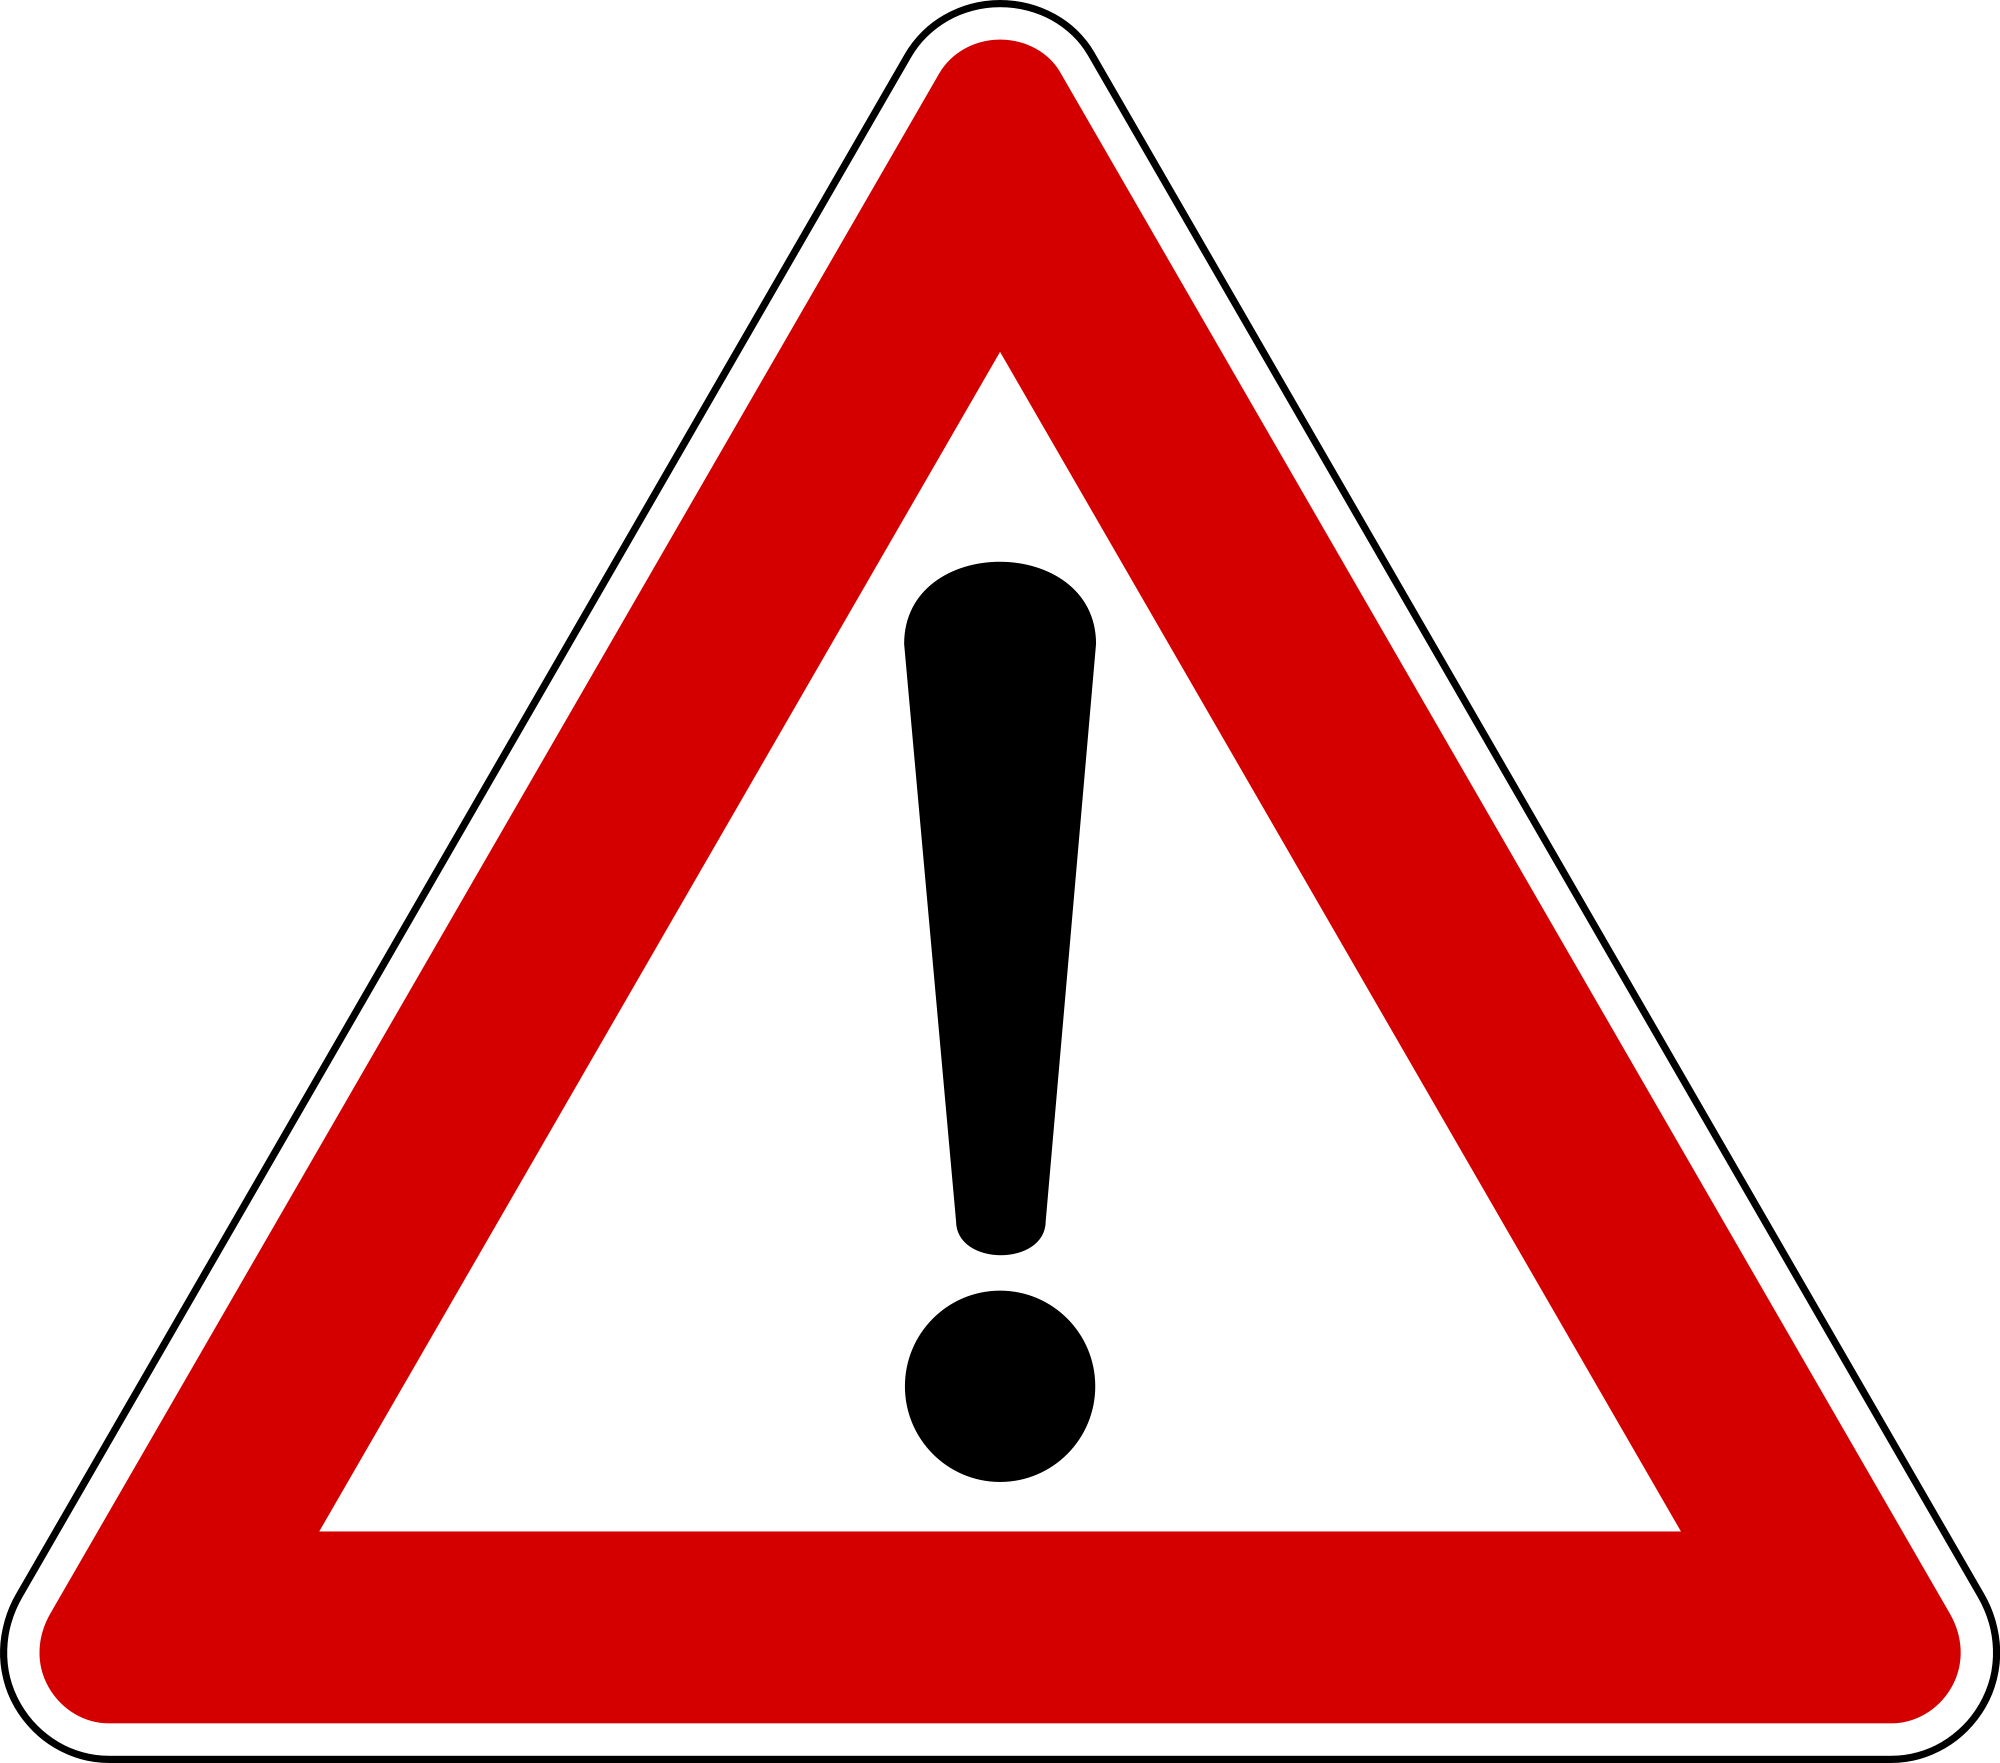 Open - Red Triangle Road Sign (2000x1763)